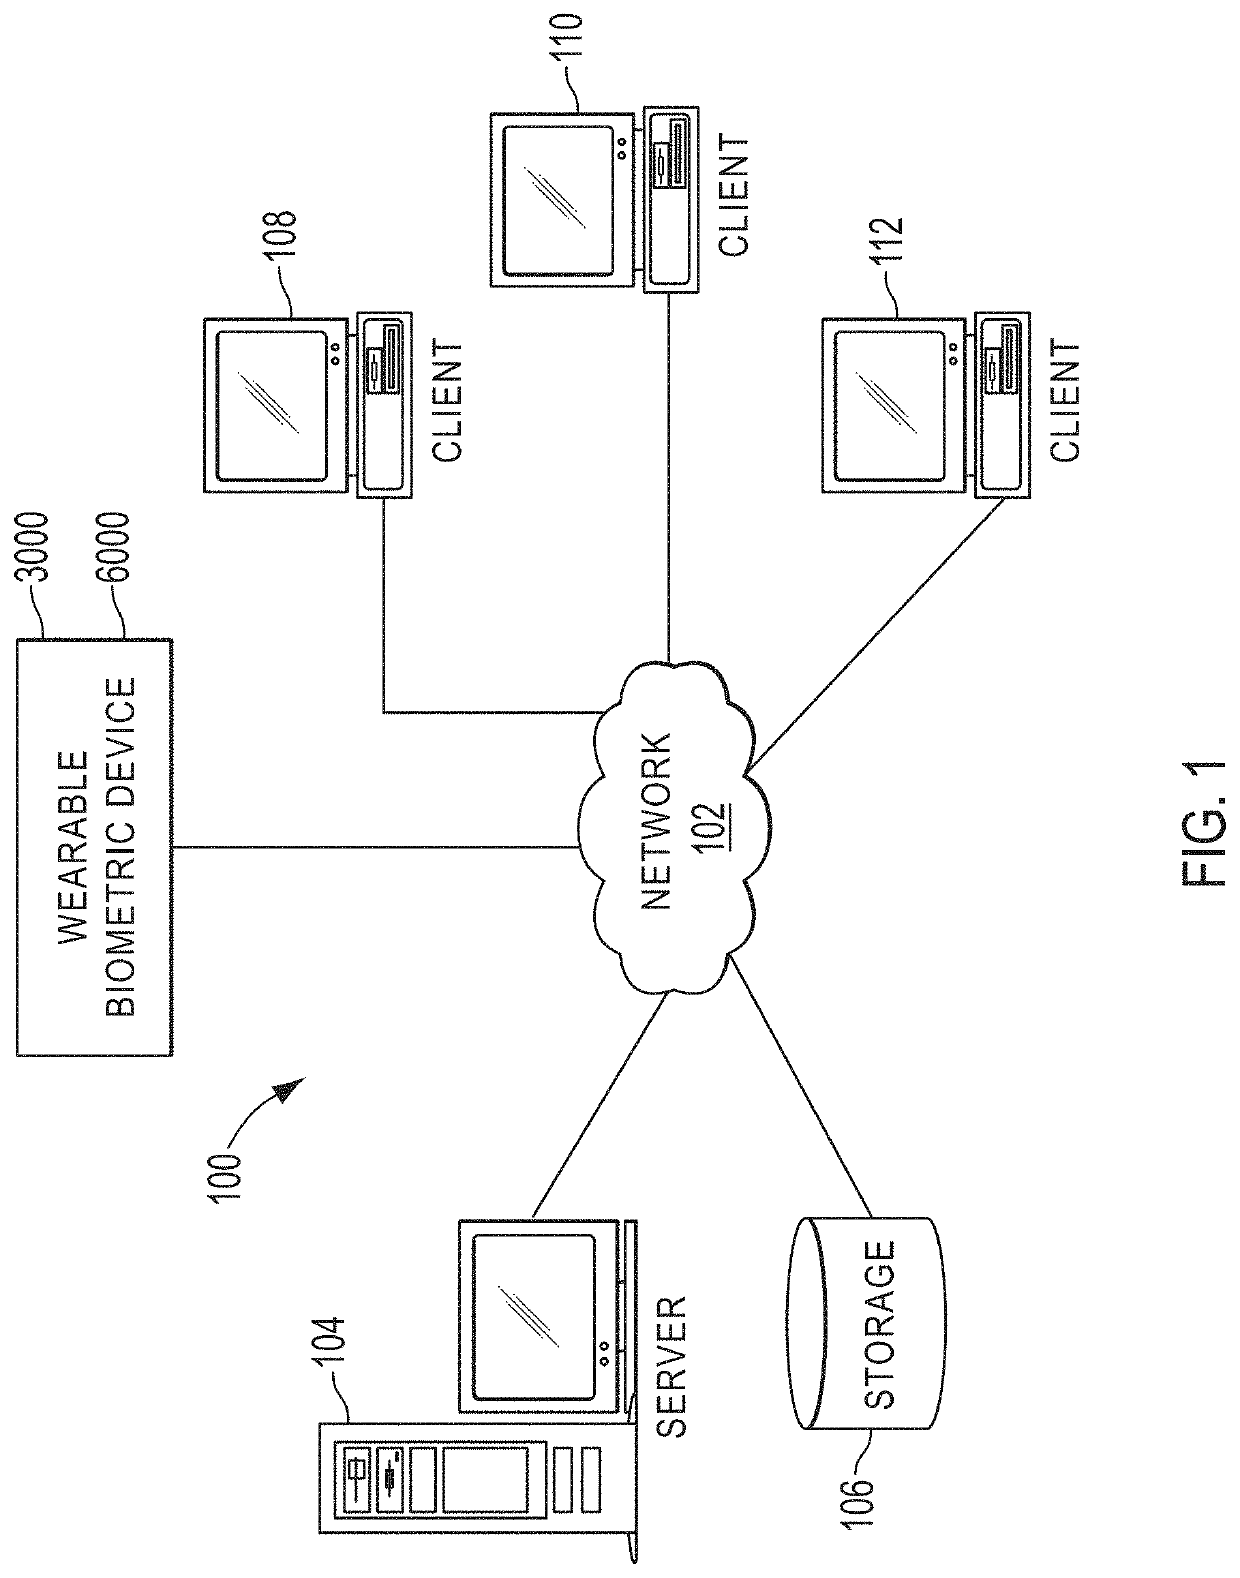 System, device and method for detecting and monitoring a biological stress response for mitigating cognitive dissonance